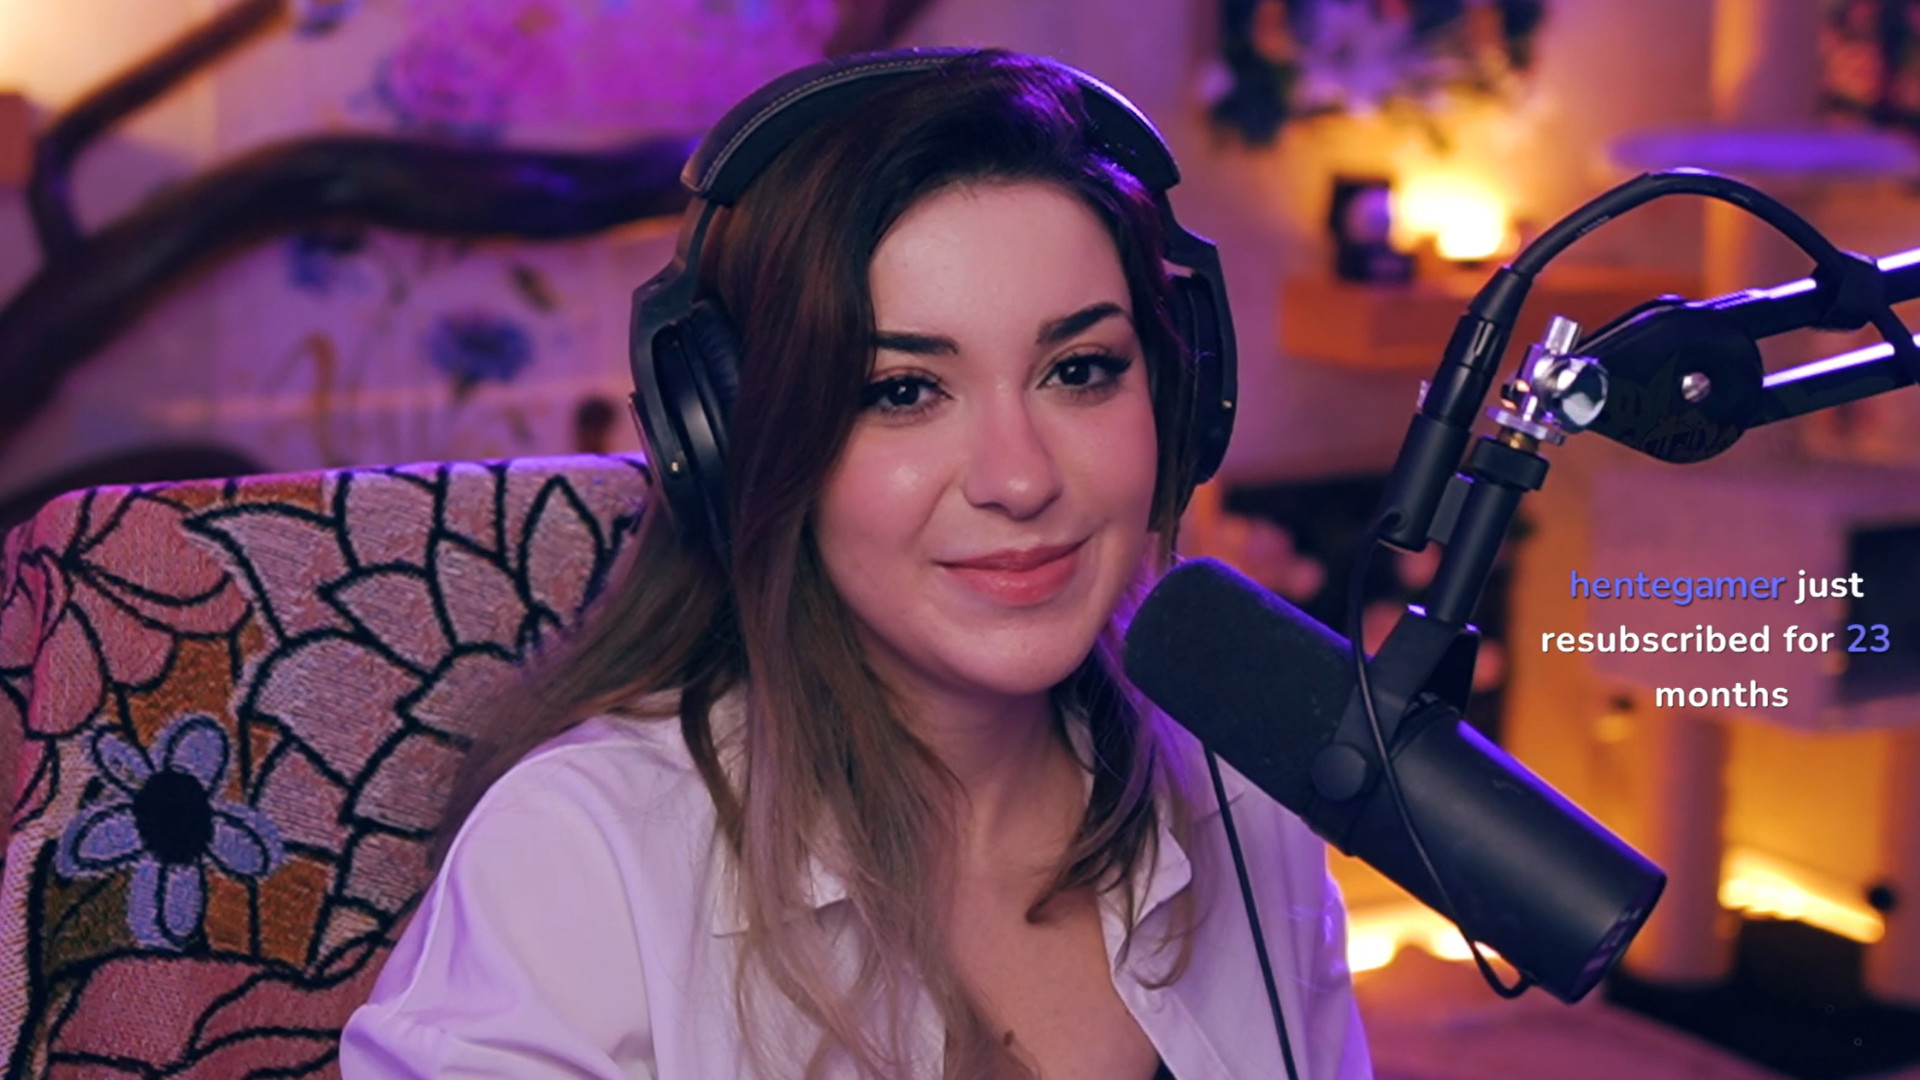 Twitch: One of the biggest streamers in Germany explains why she prefers to live abroad